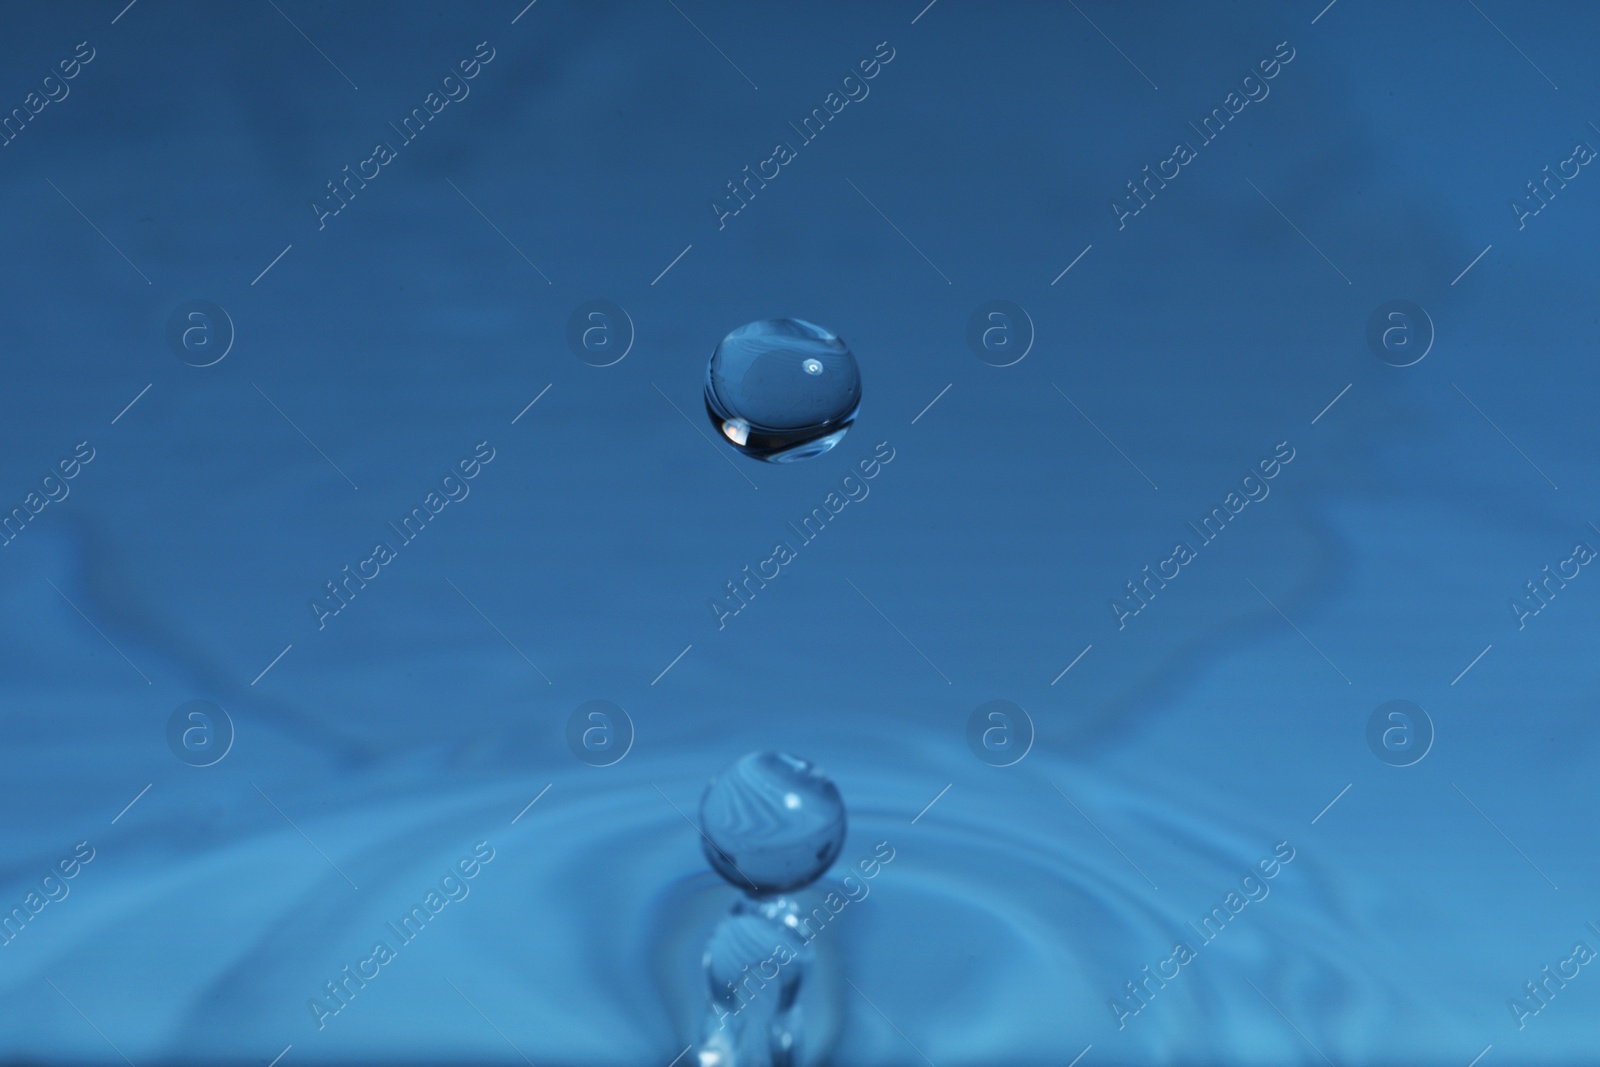 Photo of Drop falling into water on blue background, macro view